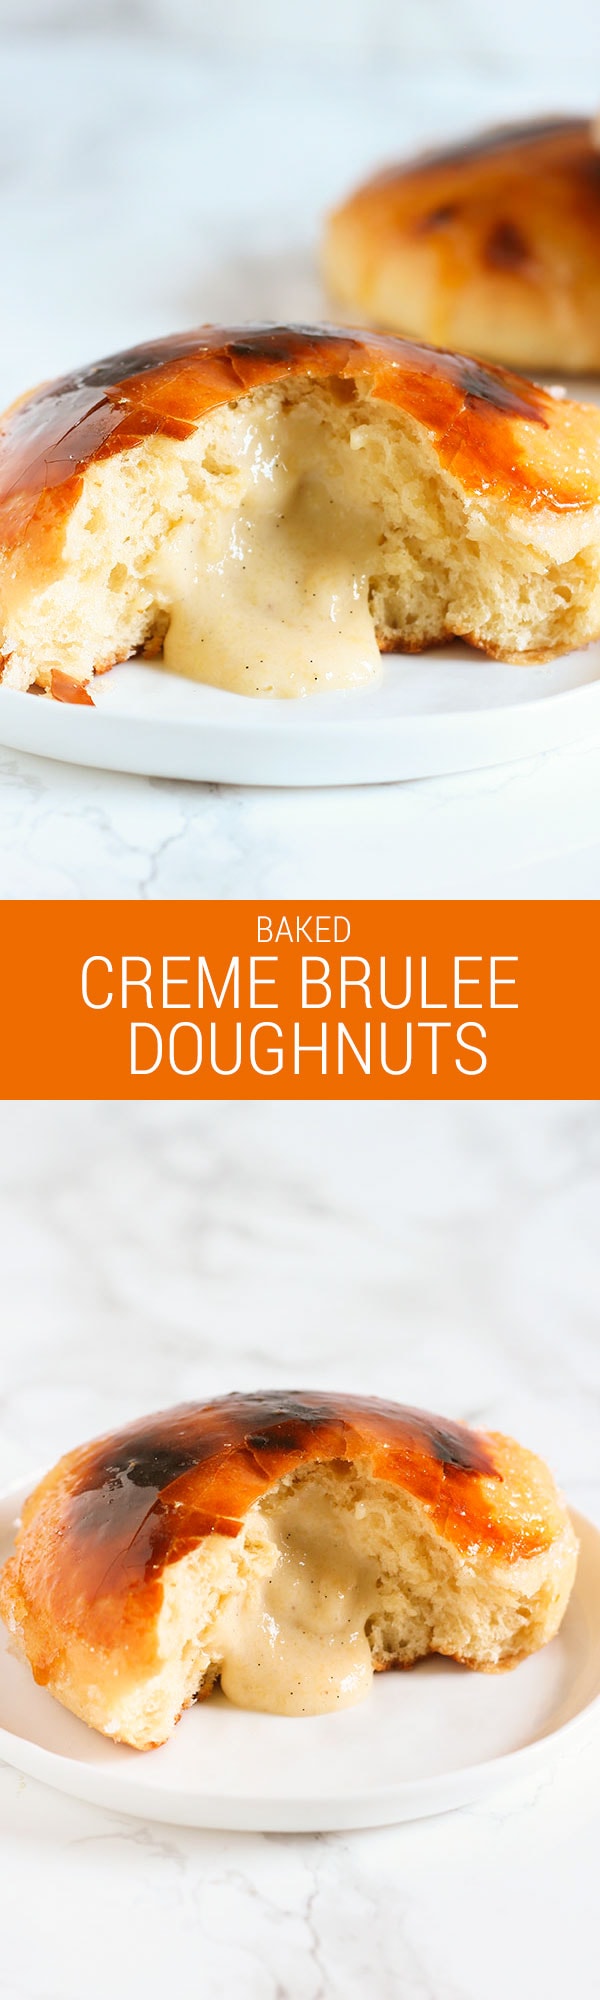 Baked Creme Brulee Doughnuts feature a baked yeast risen doughnut base filled with vanilla bean pastry cream and finished off with a shatteringly crunchy bruleed sugar coating. To die for!